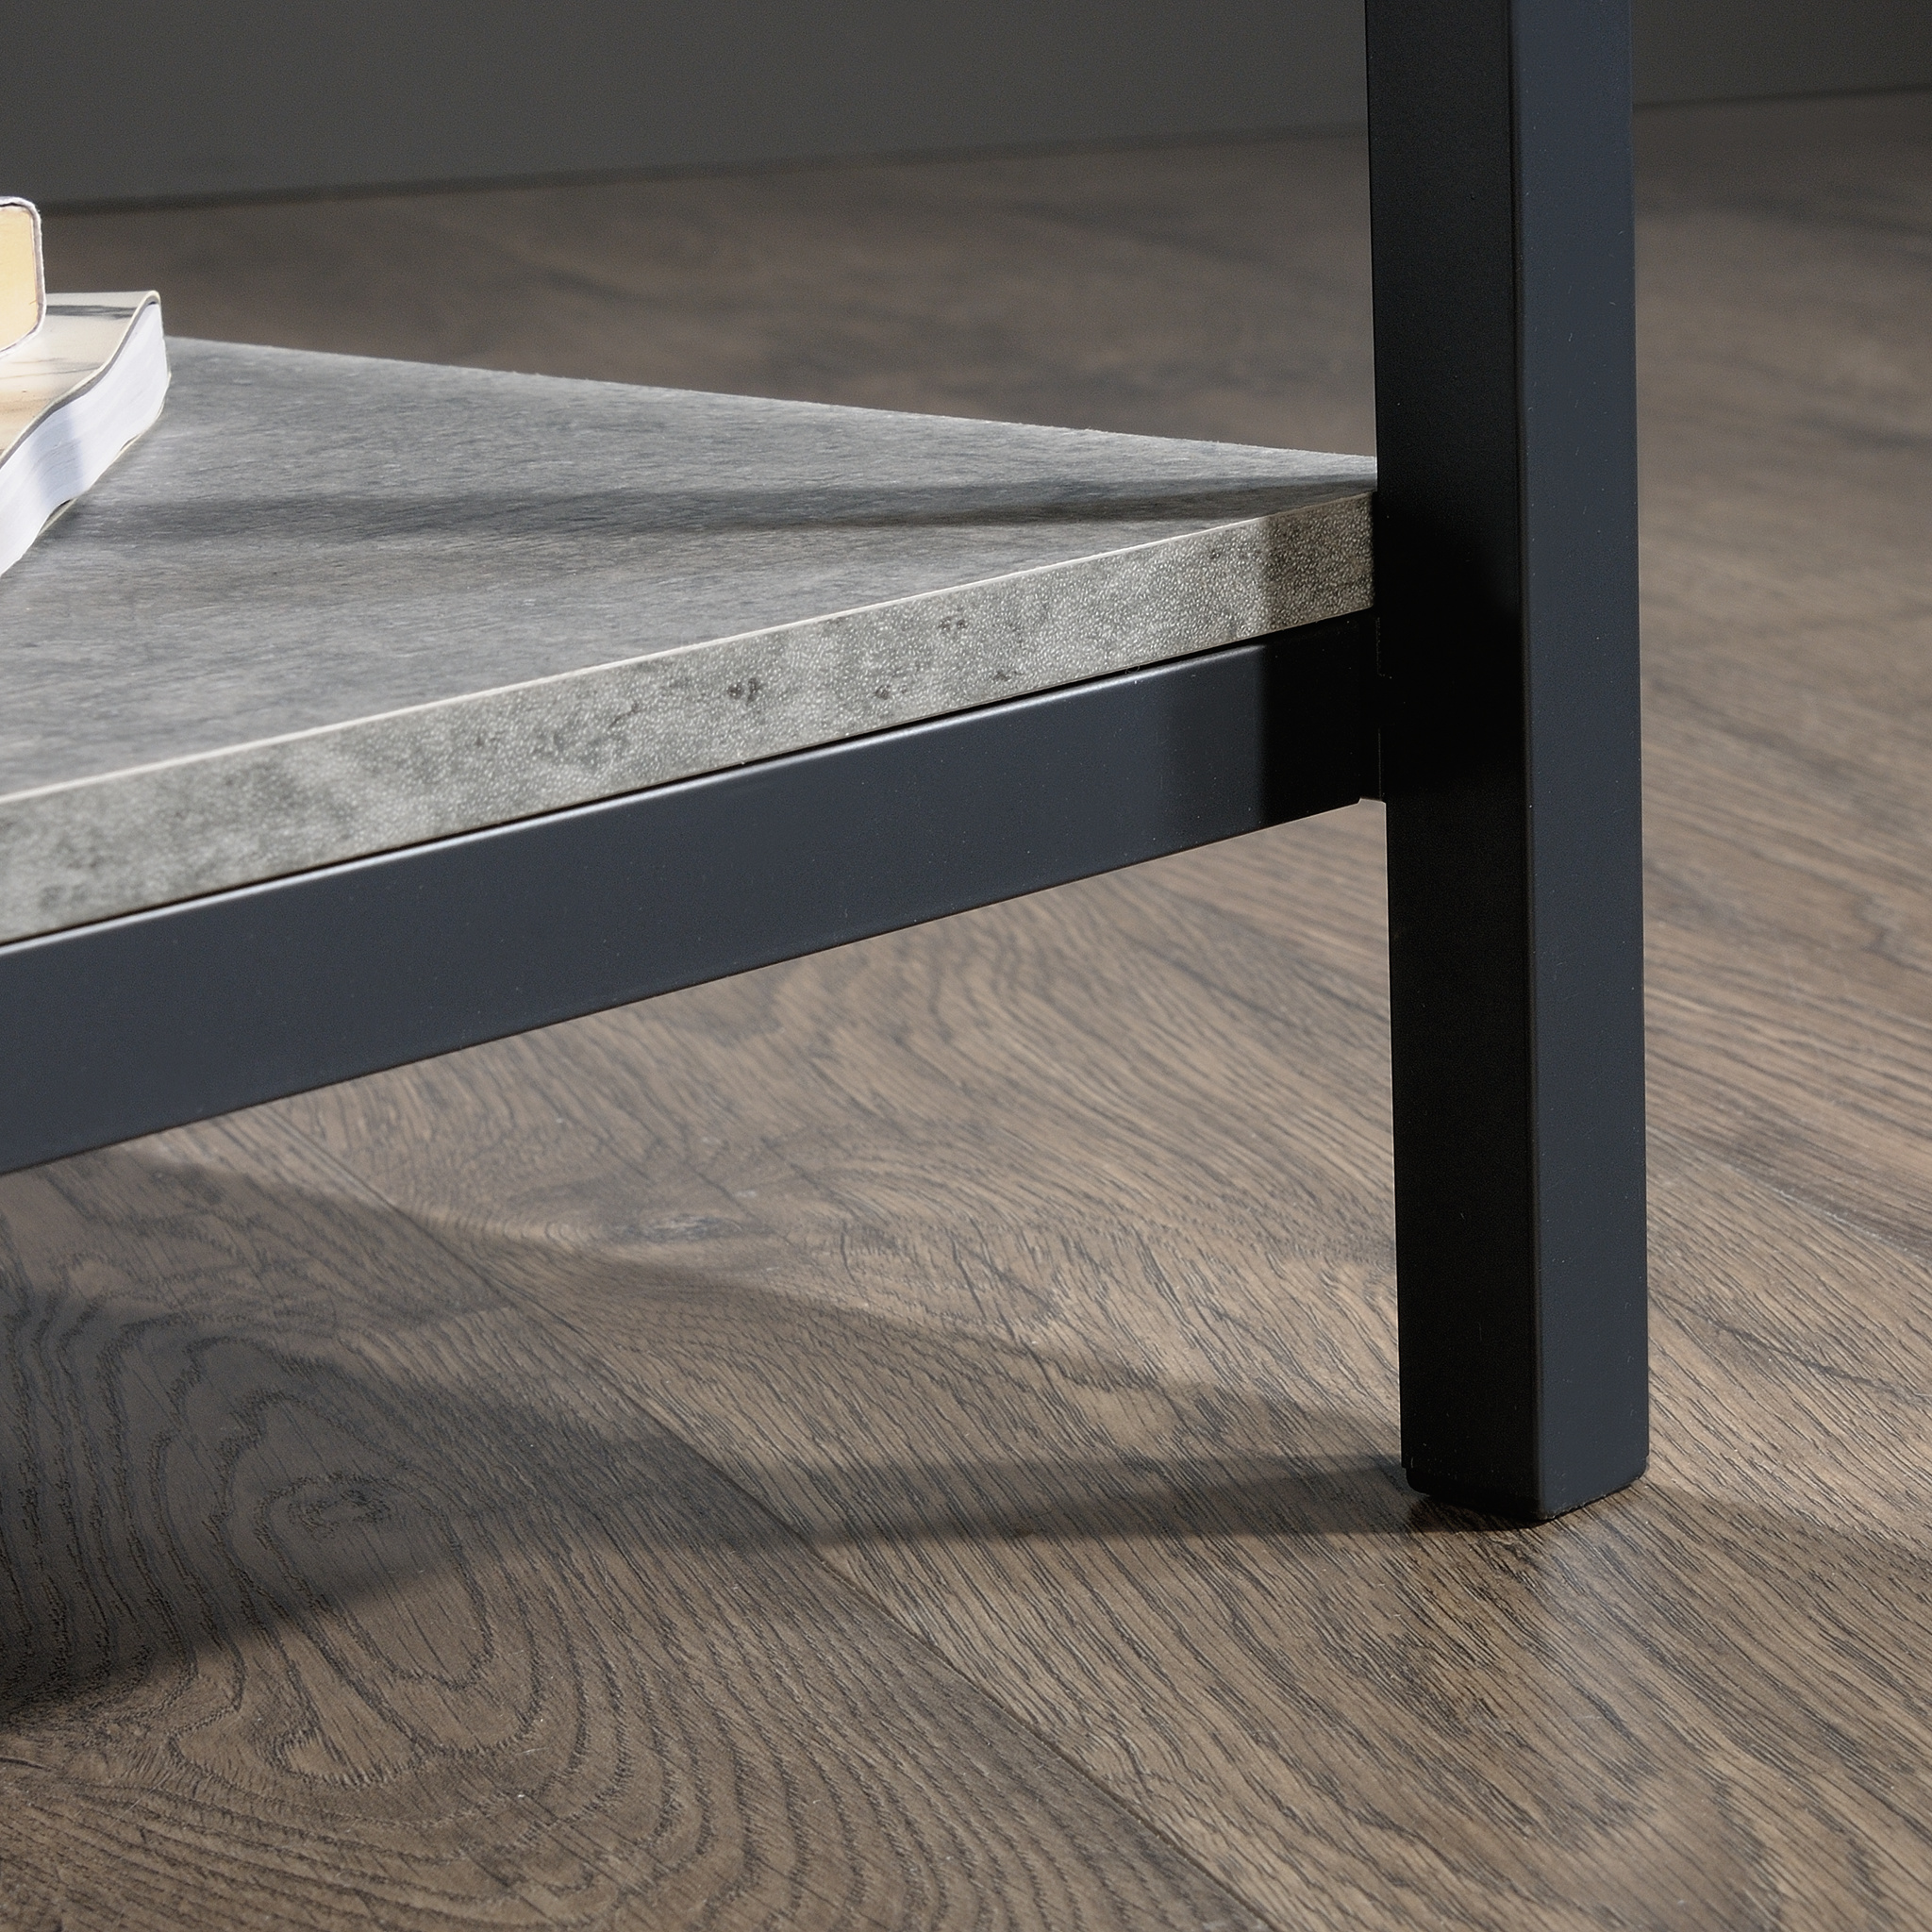 Curiod Square Metal Frame End Table, Faux Concrete Finish - image 2 of 9